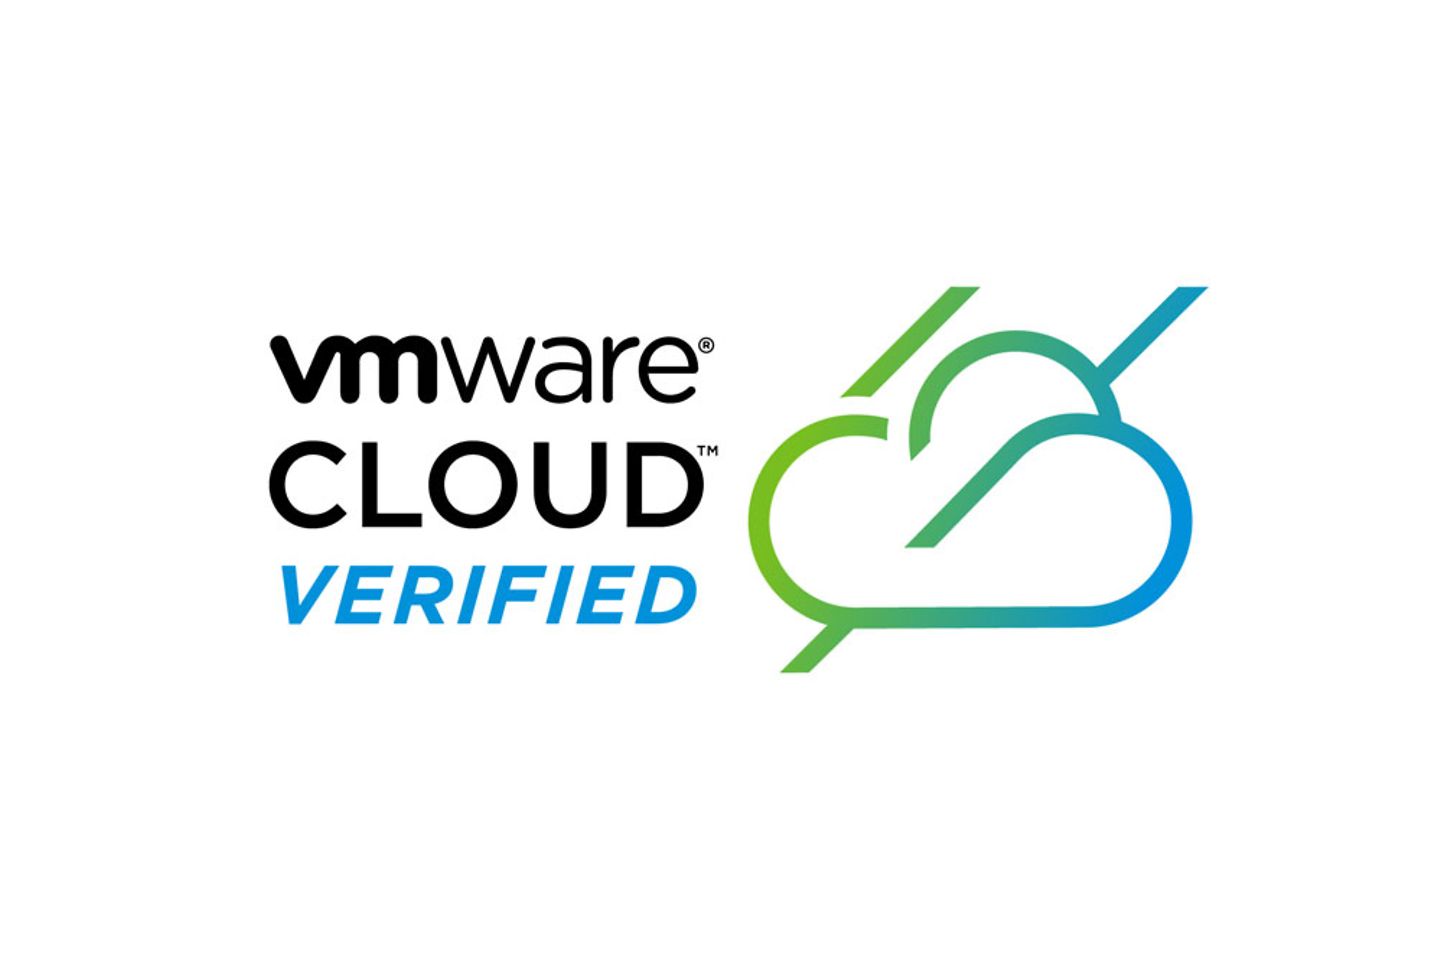 VMware logo together with a cloud symbol